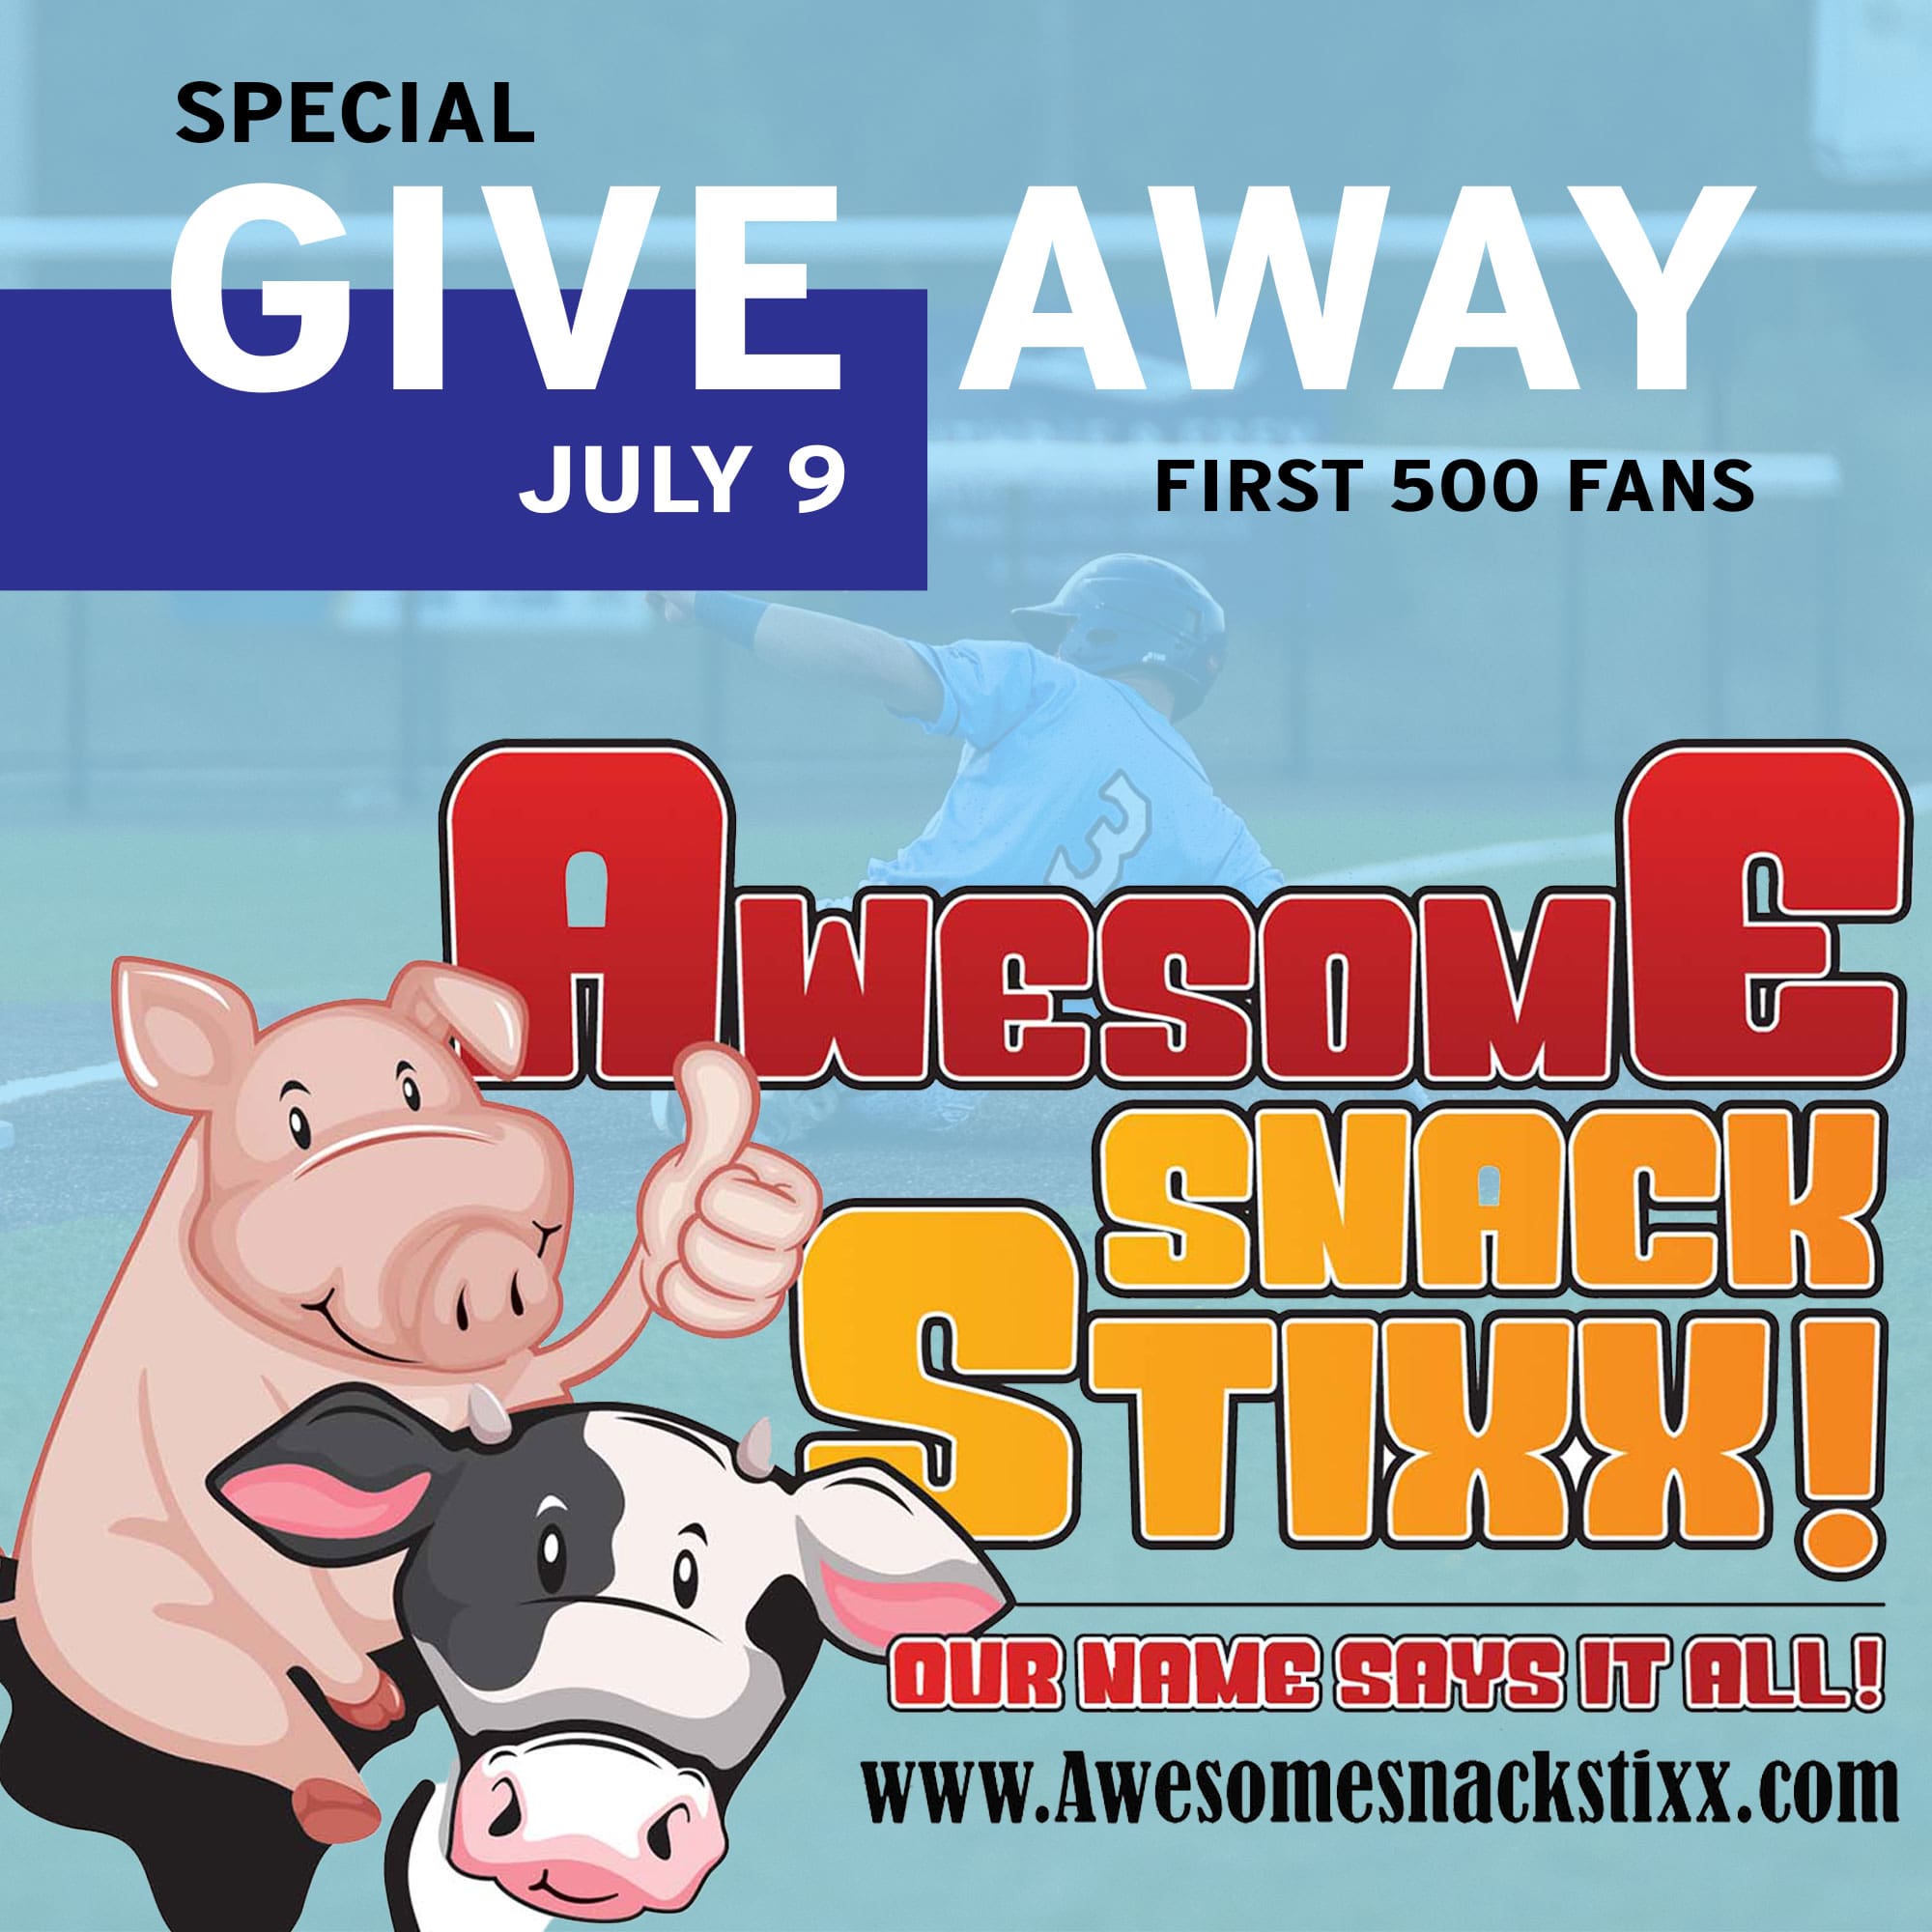 Awesome Snack Stixx give away July 9